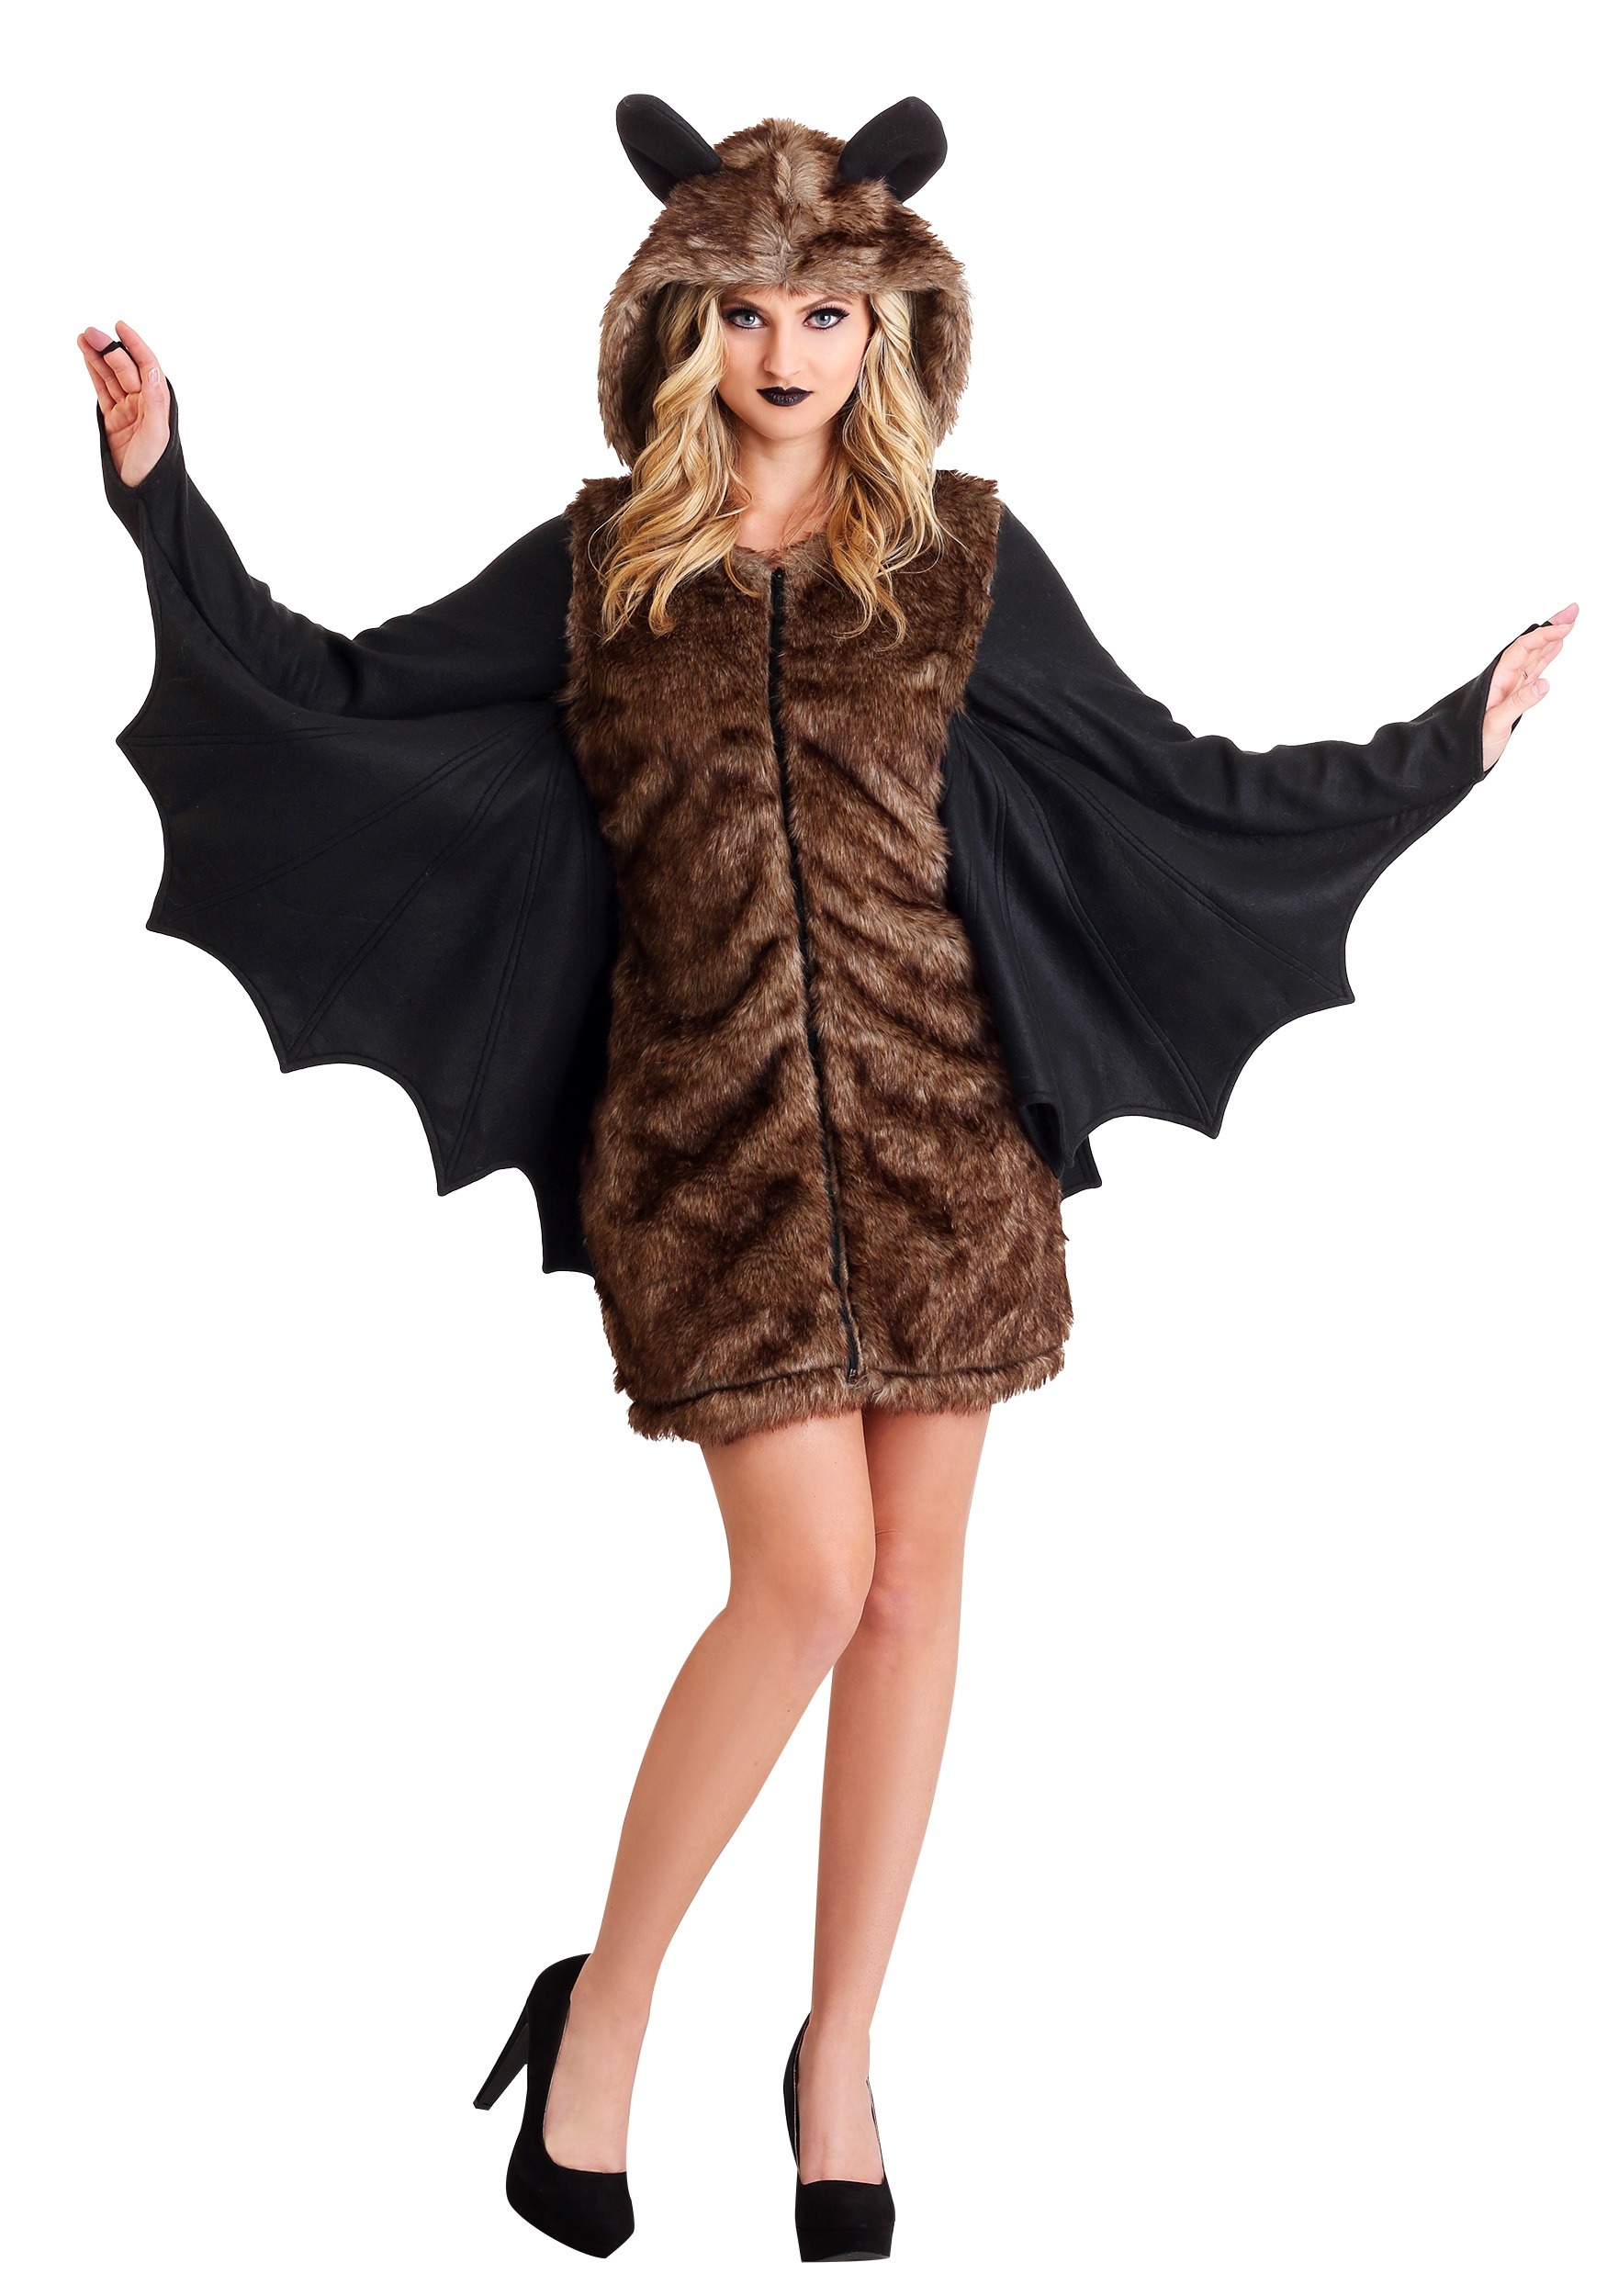 Image of Deluxe Women's Bat Costume | Adult Animal Costumes ID FUN4067AD-XL